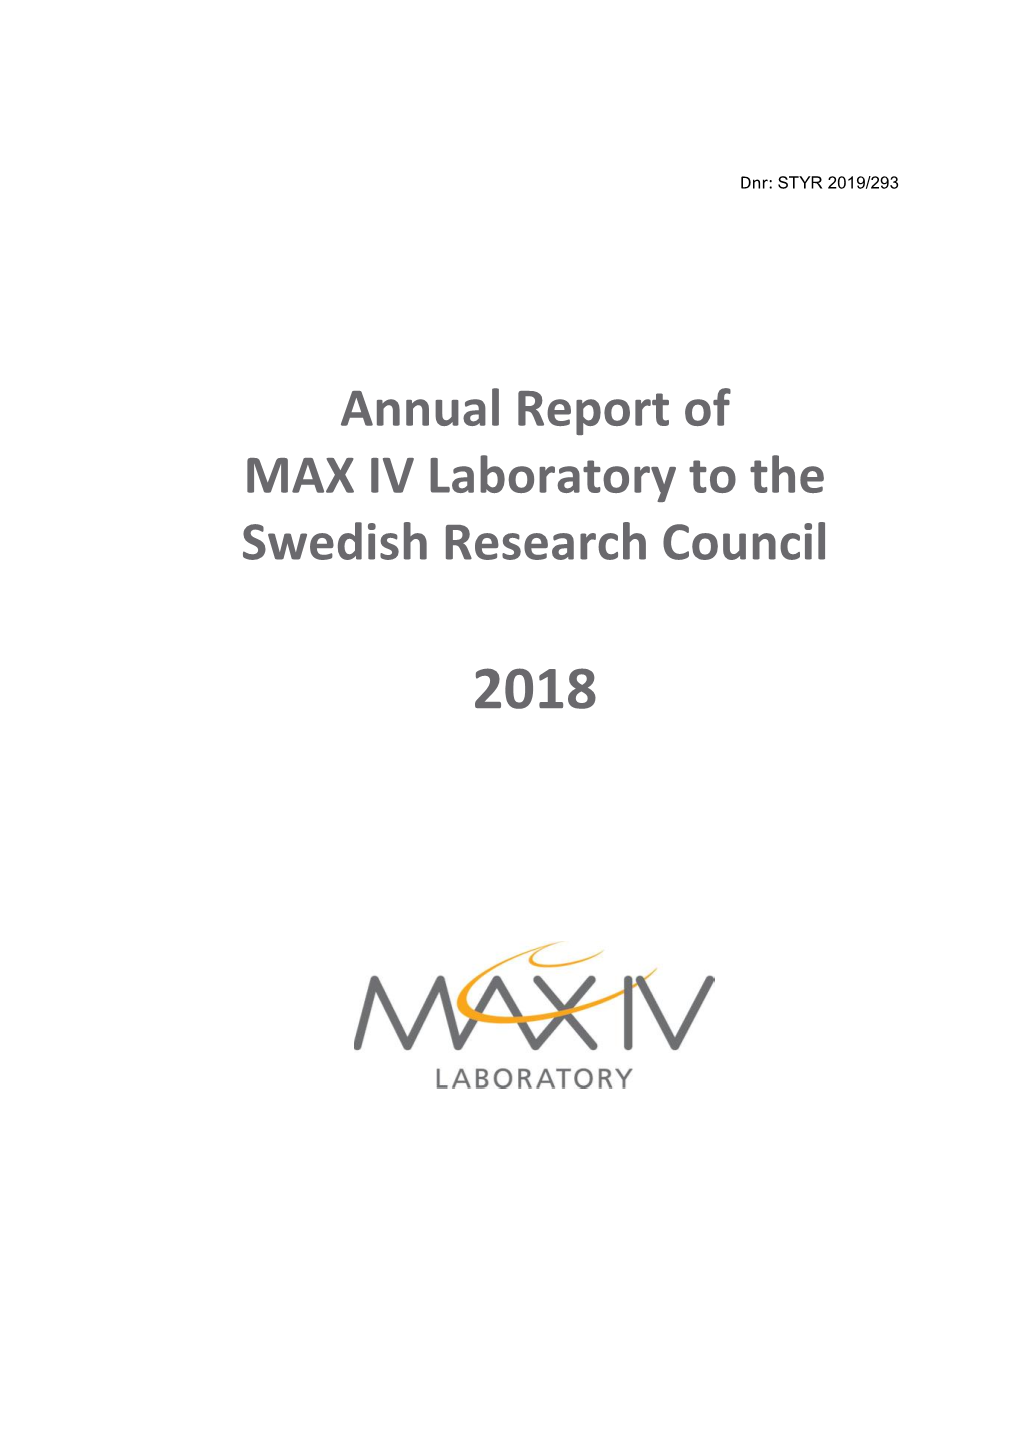 Annual Report of MAX IV Laboratory to the Swedish Research Council